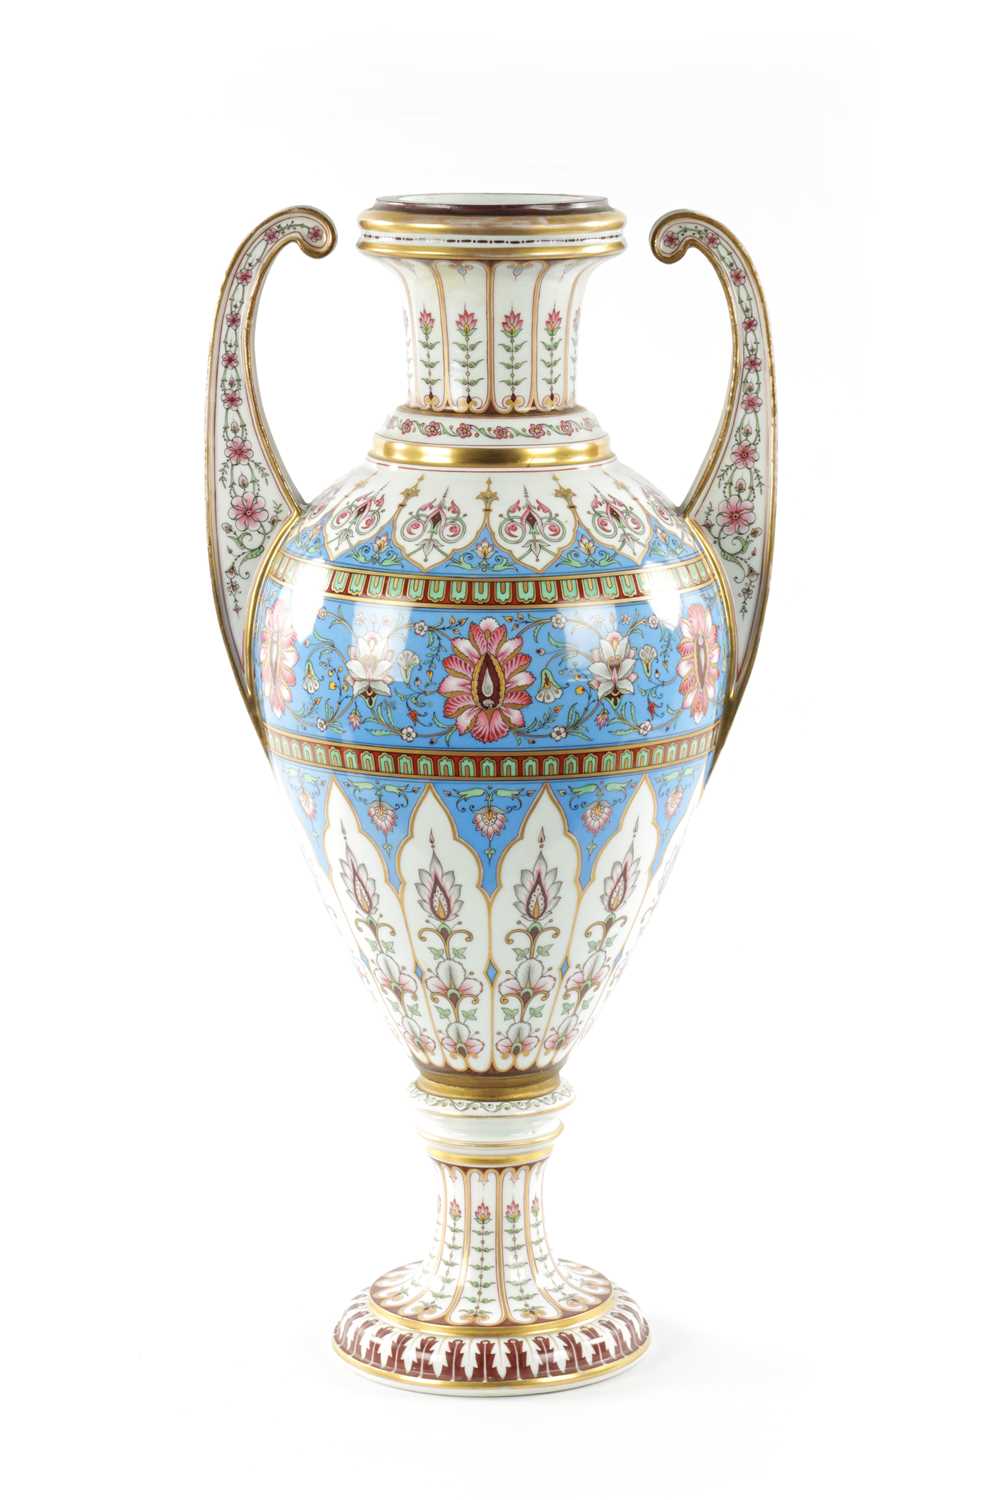 Lot 474 - A LARGE LATE 19TH CENTURY PORCELAIN VASE POSSIBLY RUSSIAN